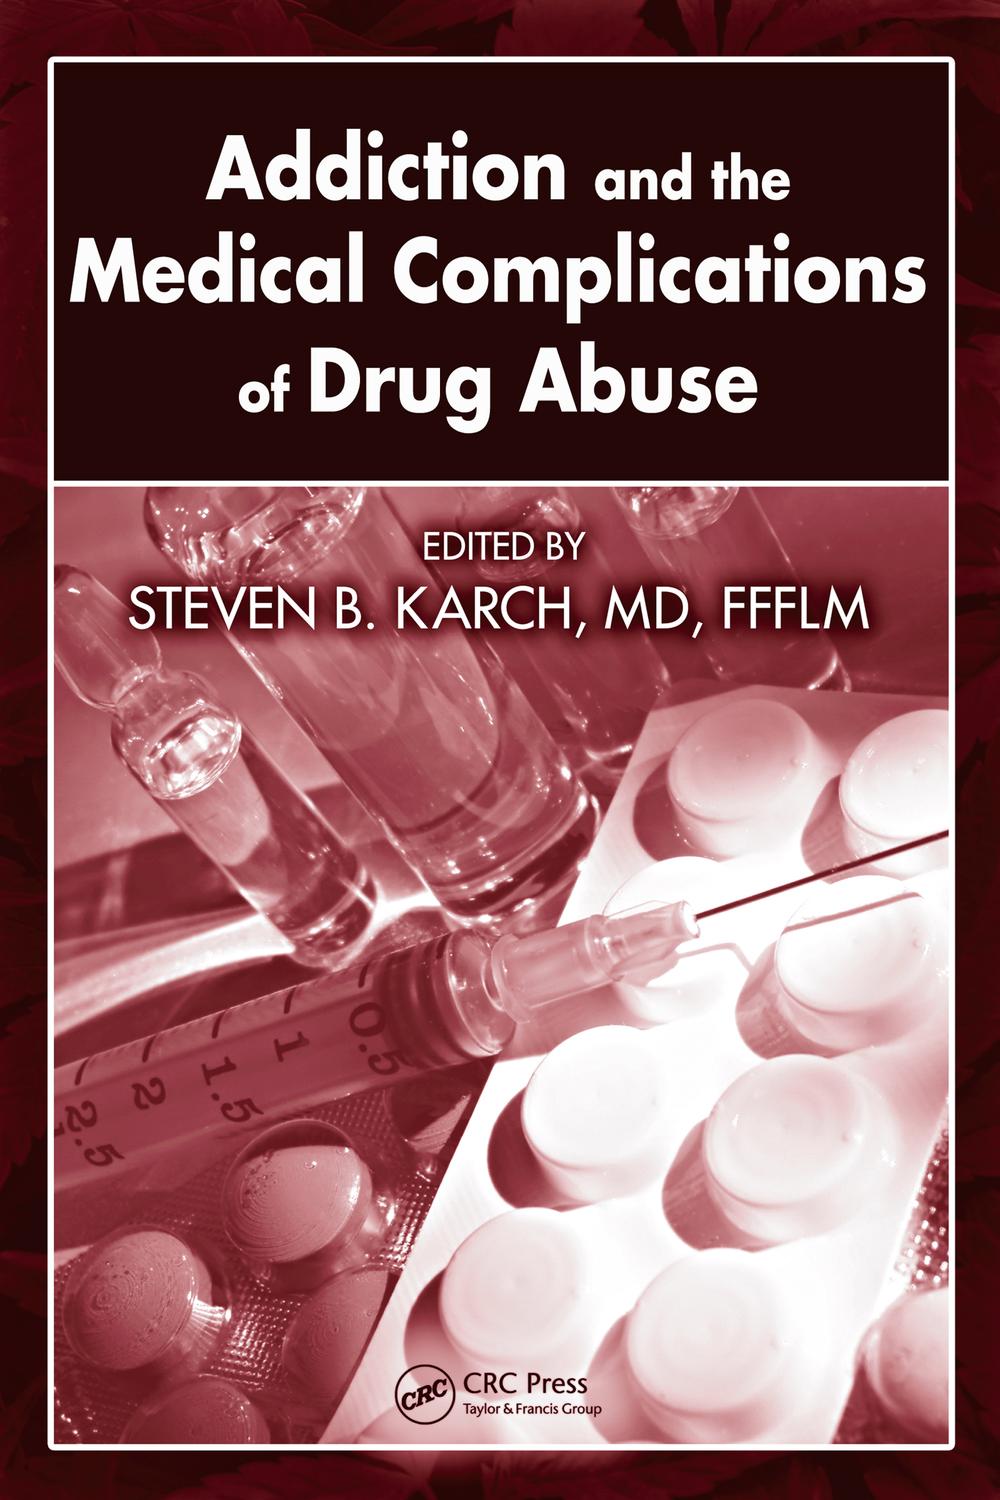 Addiction and the Medical Complications of Drug Abuse - MD, FFFLM, Steven B. Karch